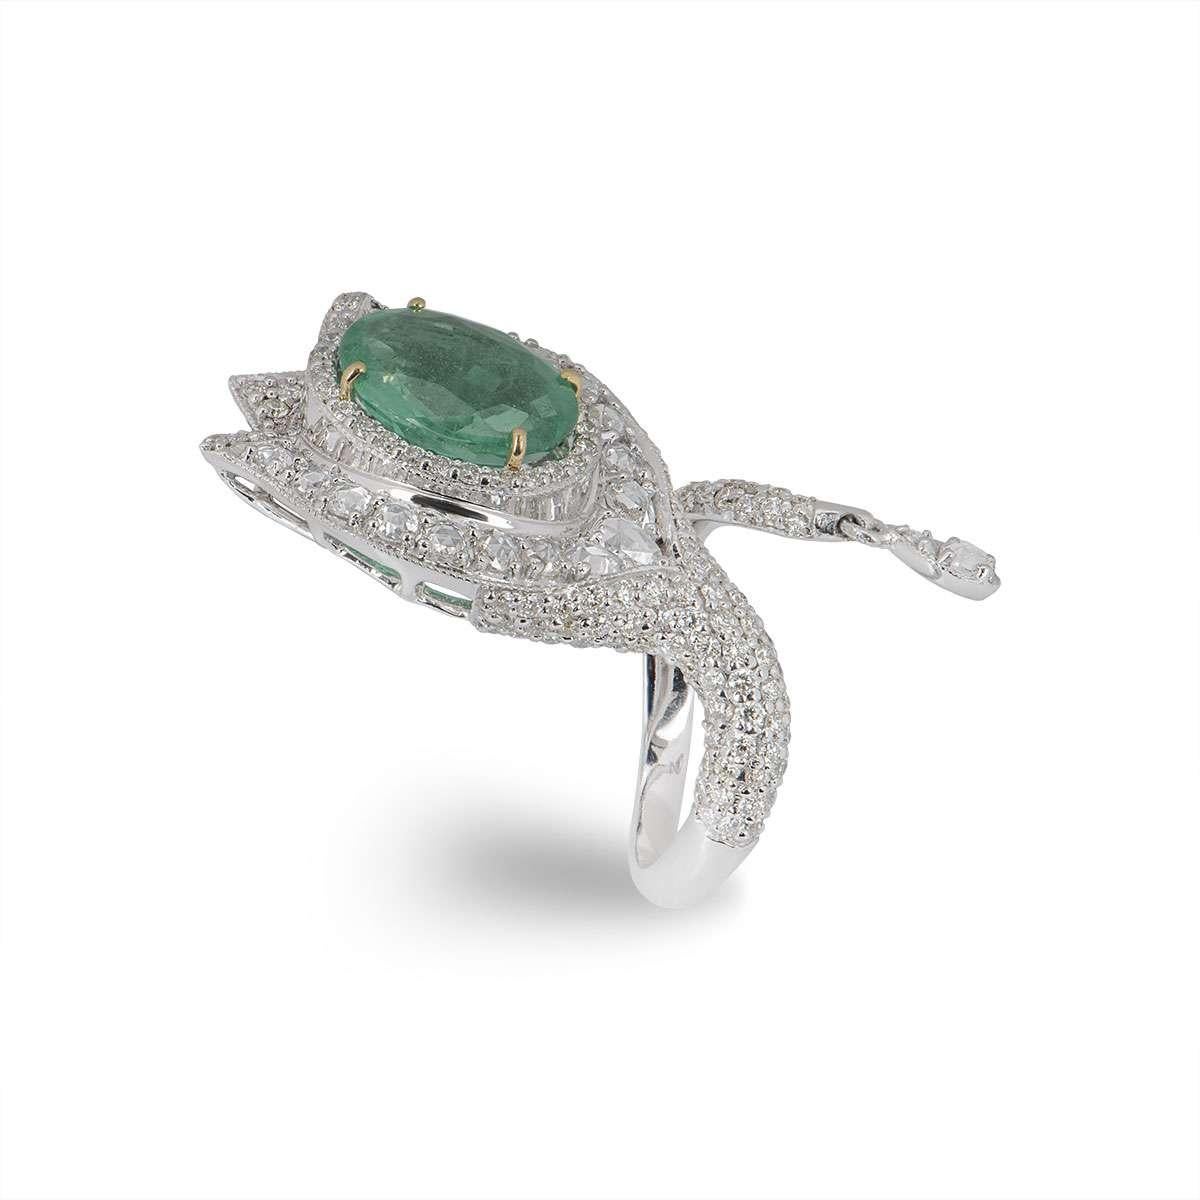 An 18k white gold diamond and emerald dress ring. The ring wraps around the finger and is set with round brilliant cut diamonds and rose cut diamonds. The ring is set to the centre with an oval cut emerald weighing 3.37ct, displaying an even bright